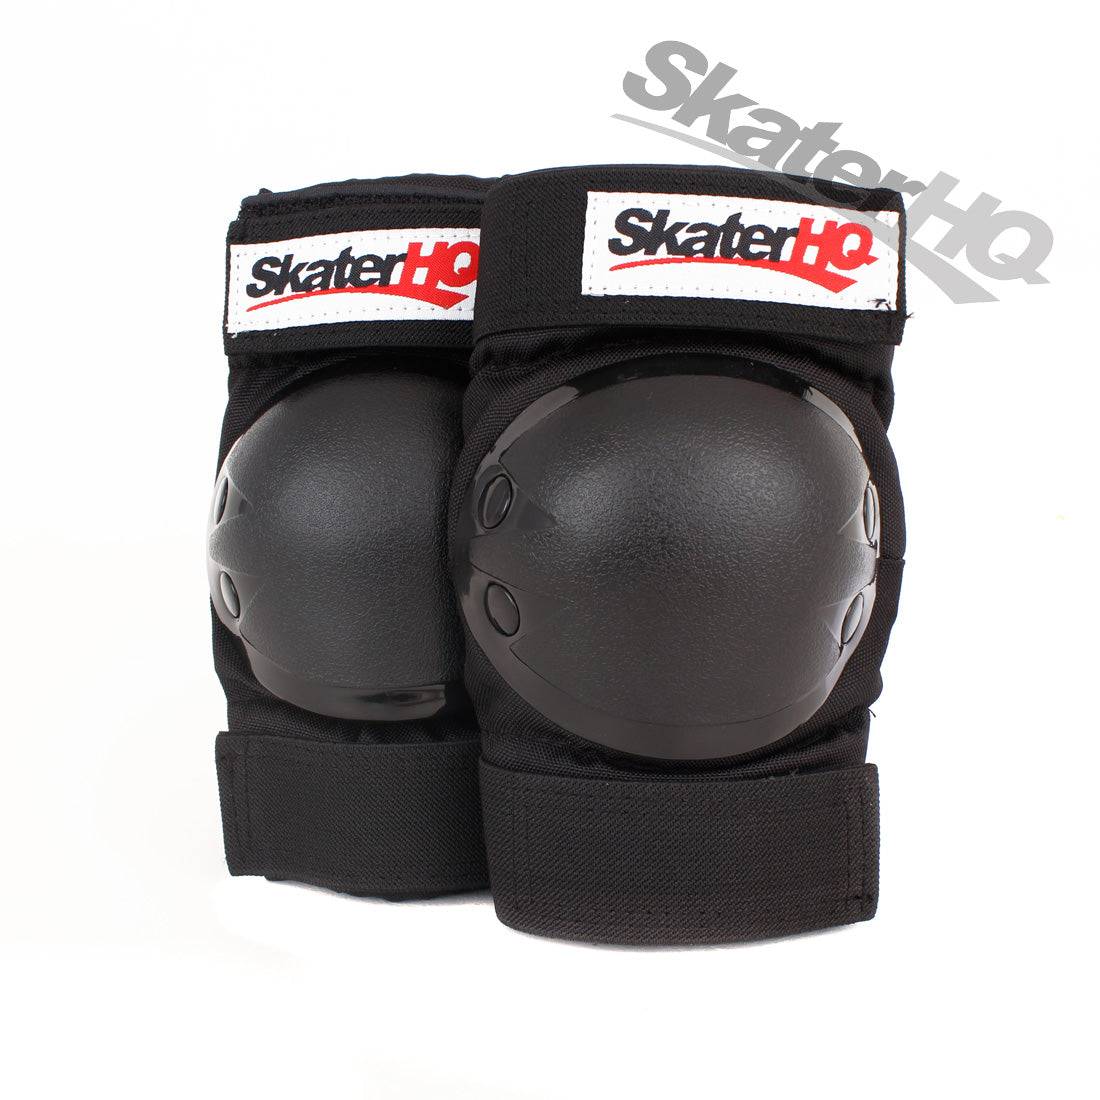 Skater HQ Knee Pads - Junior Protective Gear